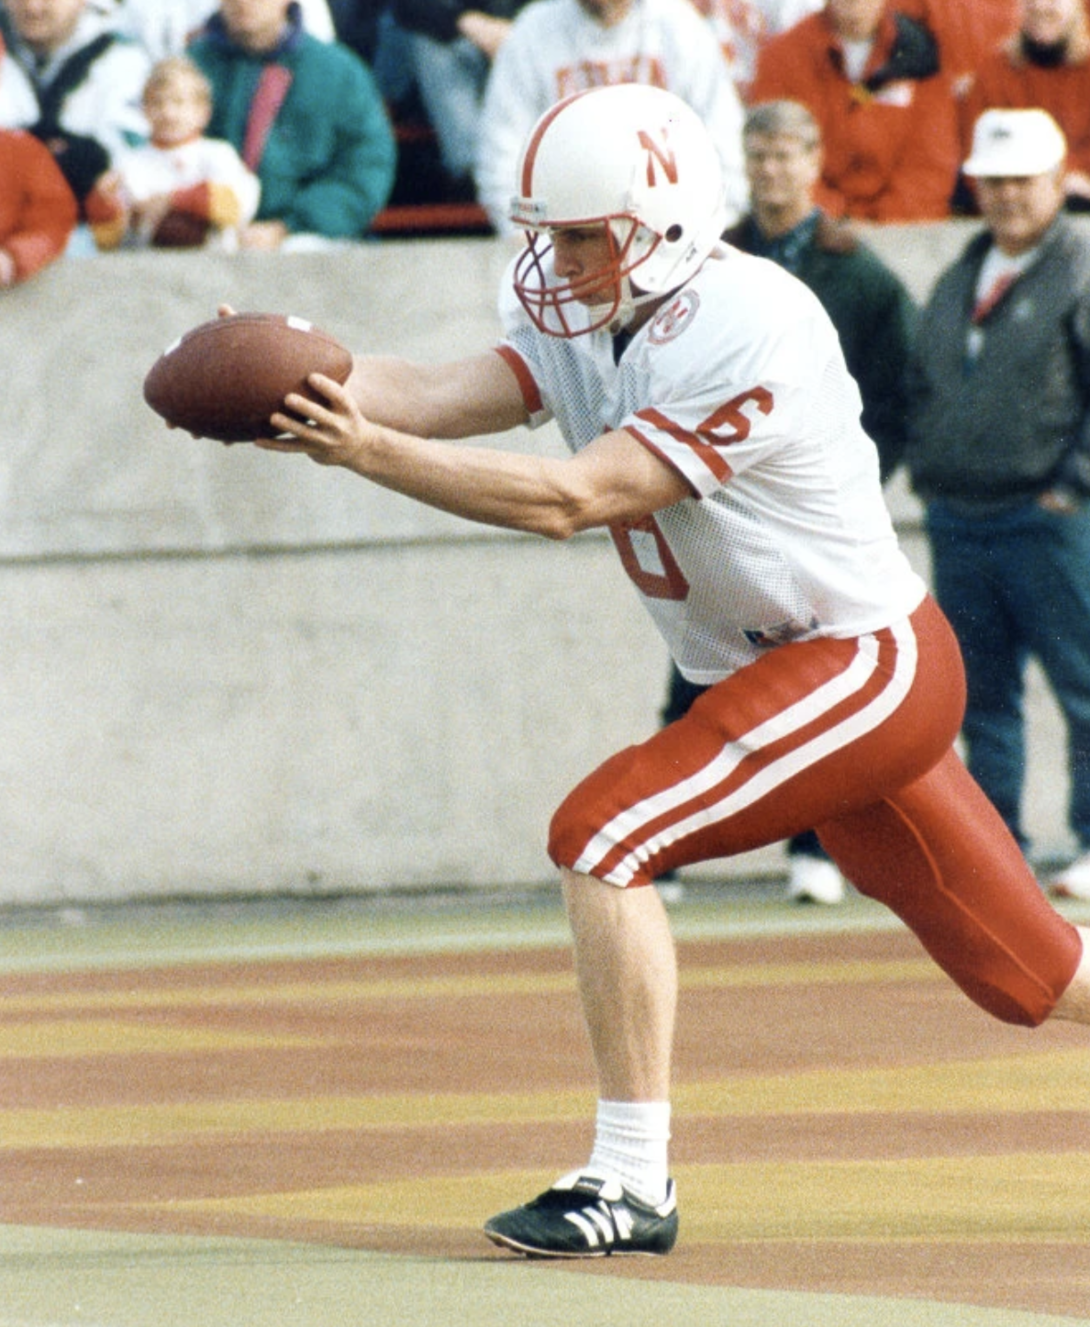 Husker baseball coach Darin Erstad was a two-sport athlete in college. Along with playing baseball, he served as punter on the 1994 Husker football NCAA championship team.